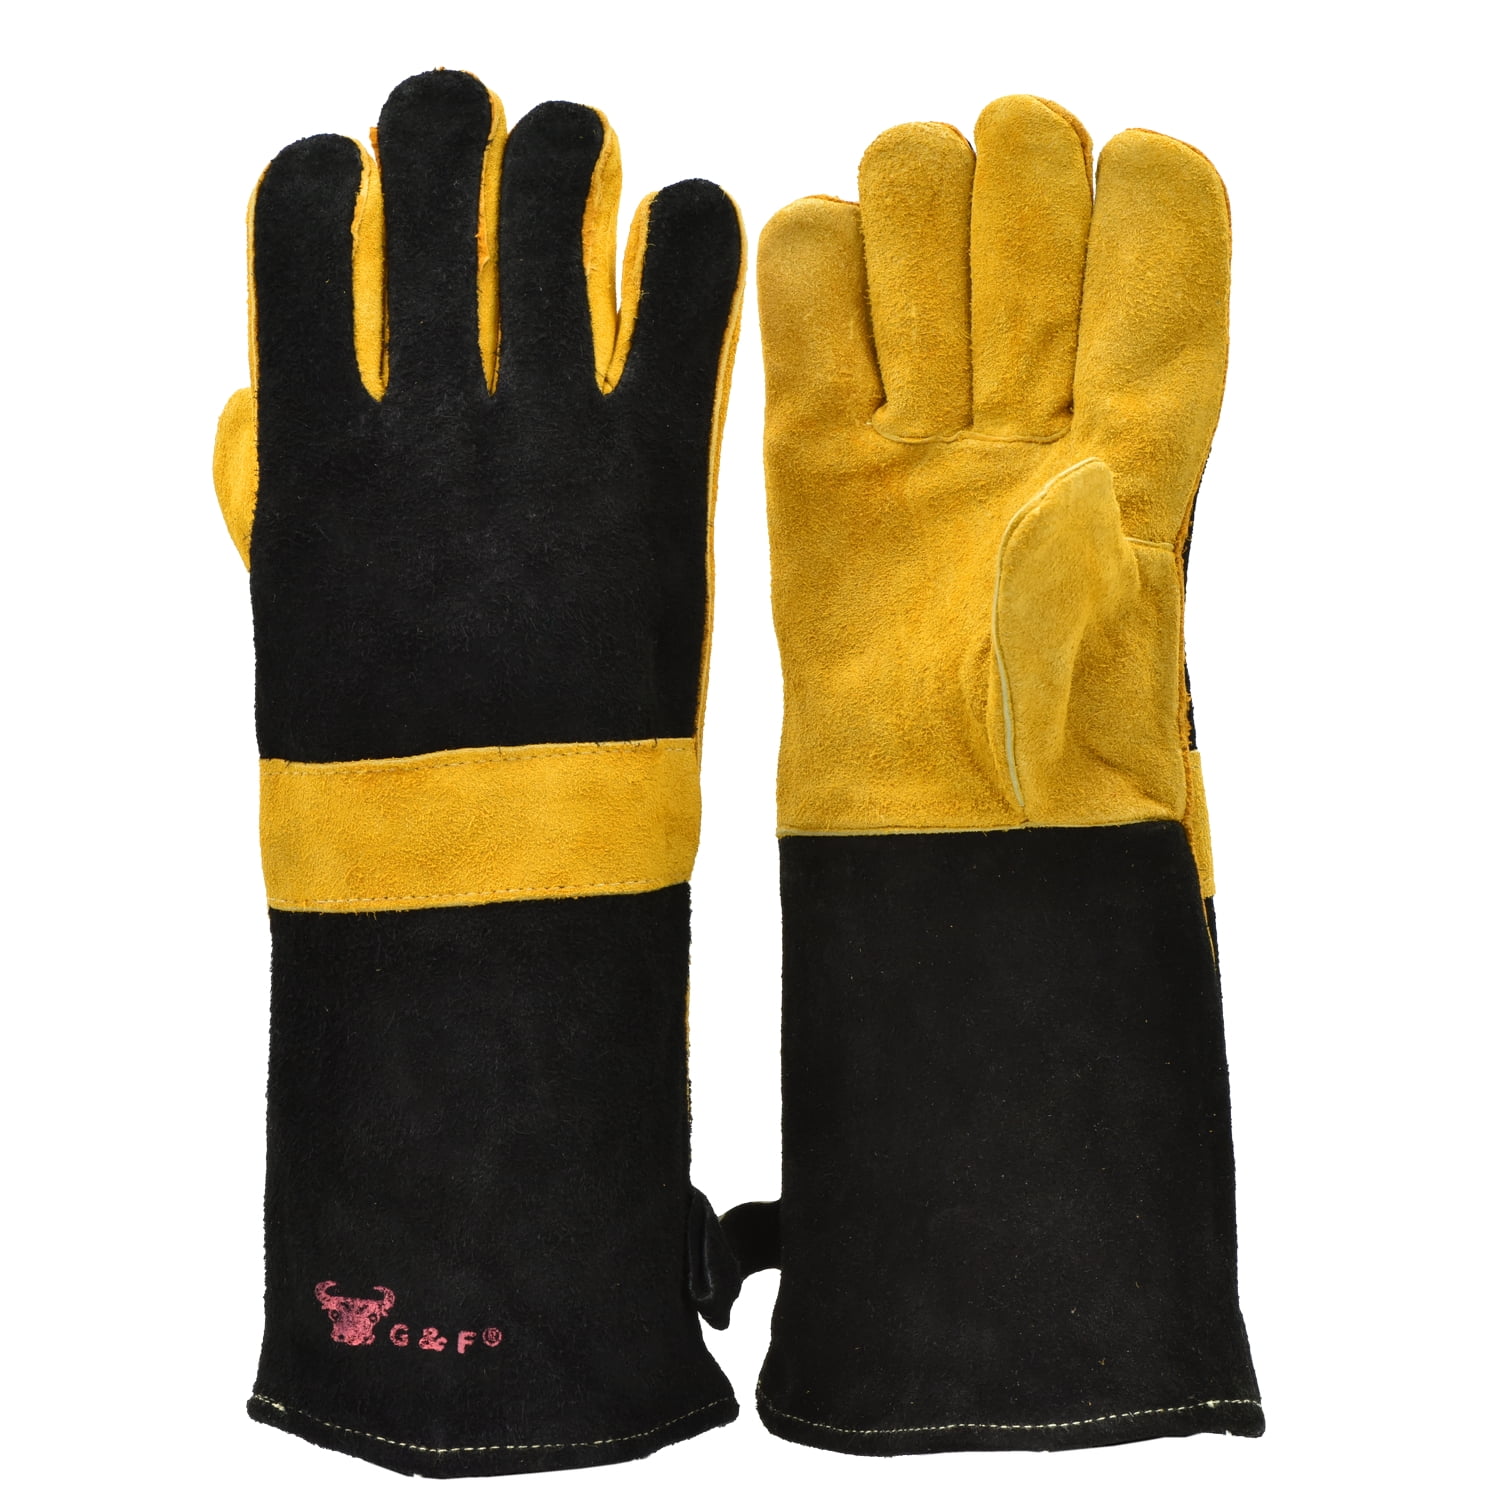 Shop JH Heat Resistant Oven Gloves | 14 Inch Long Length | Yellow